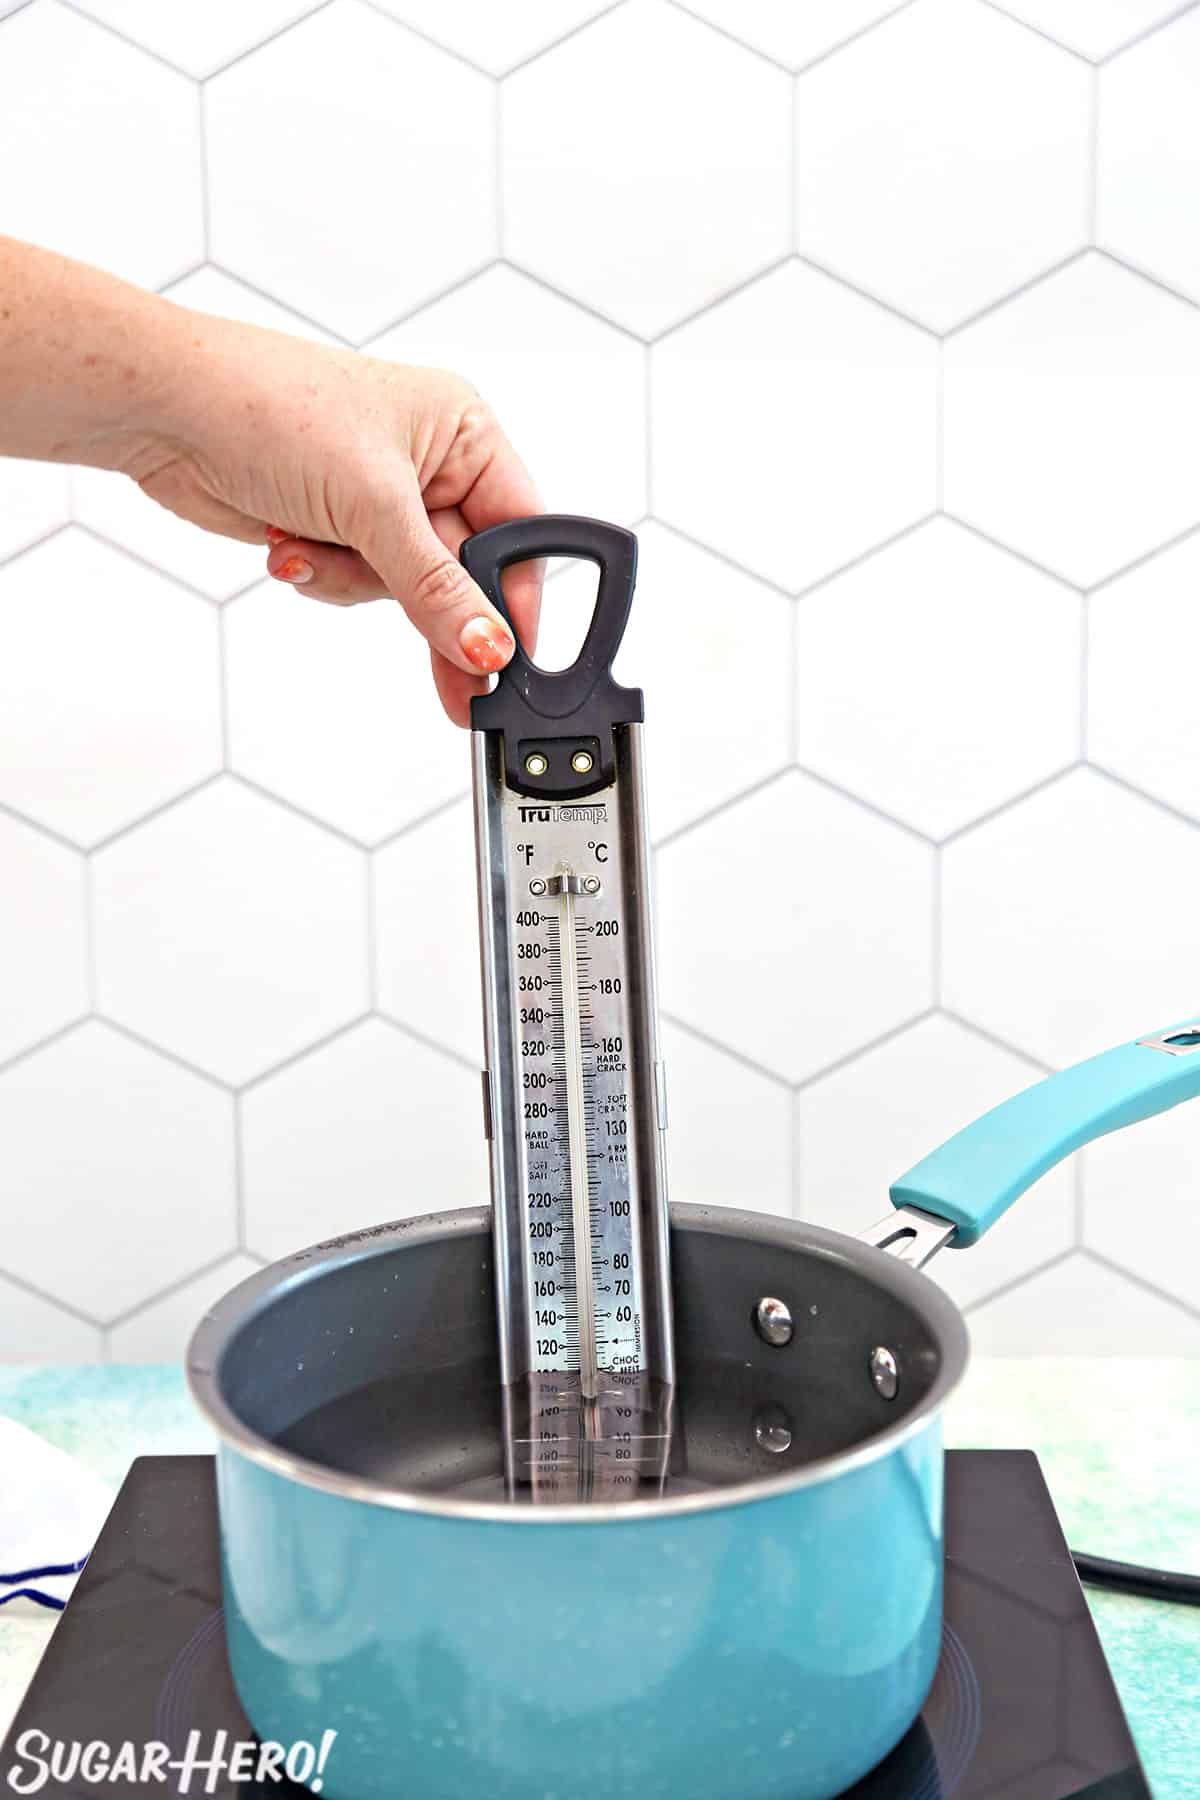 Hand inserting a thermometer in a a teal saucepan filled with water.